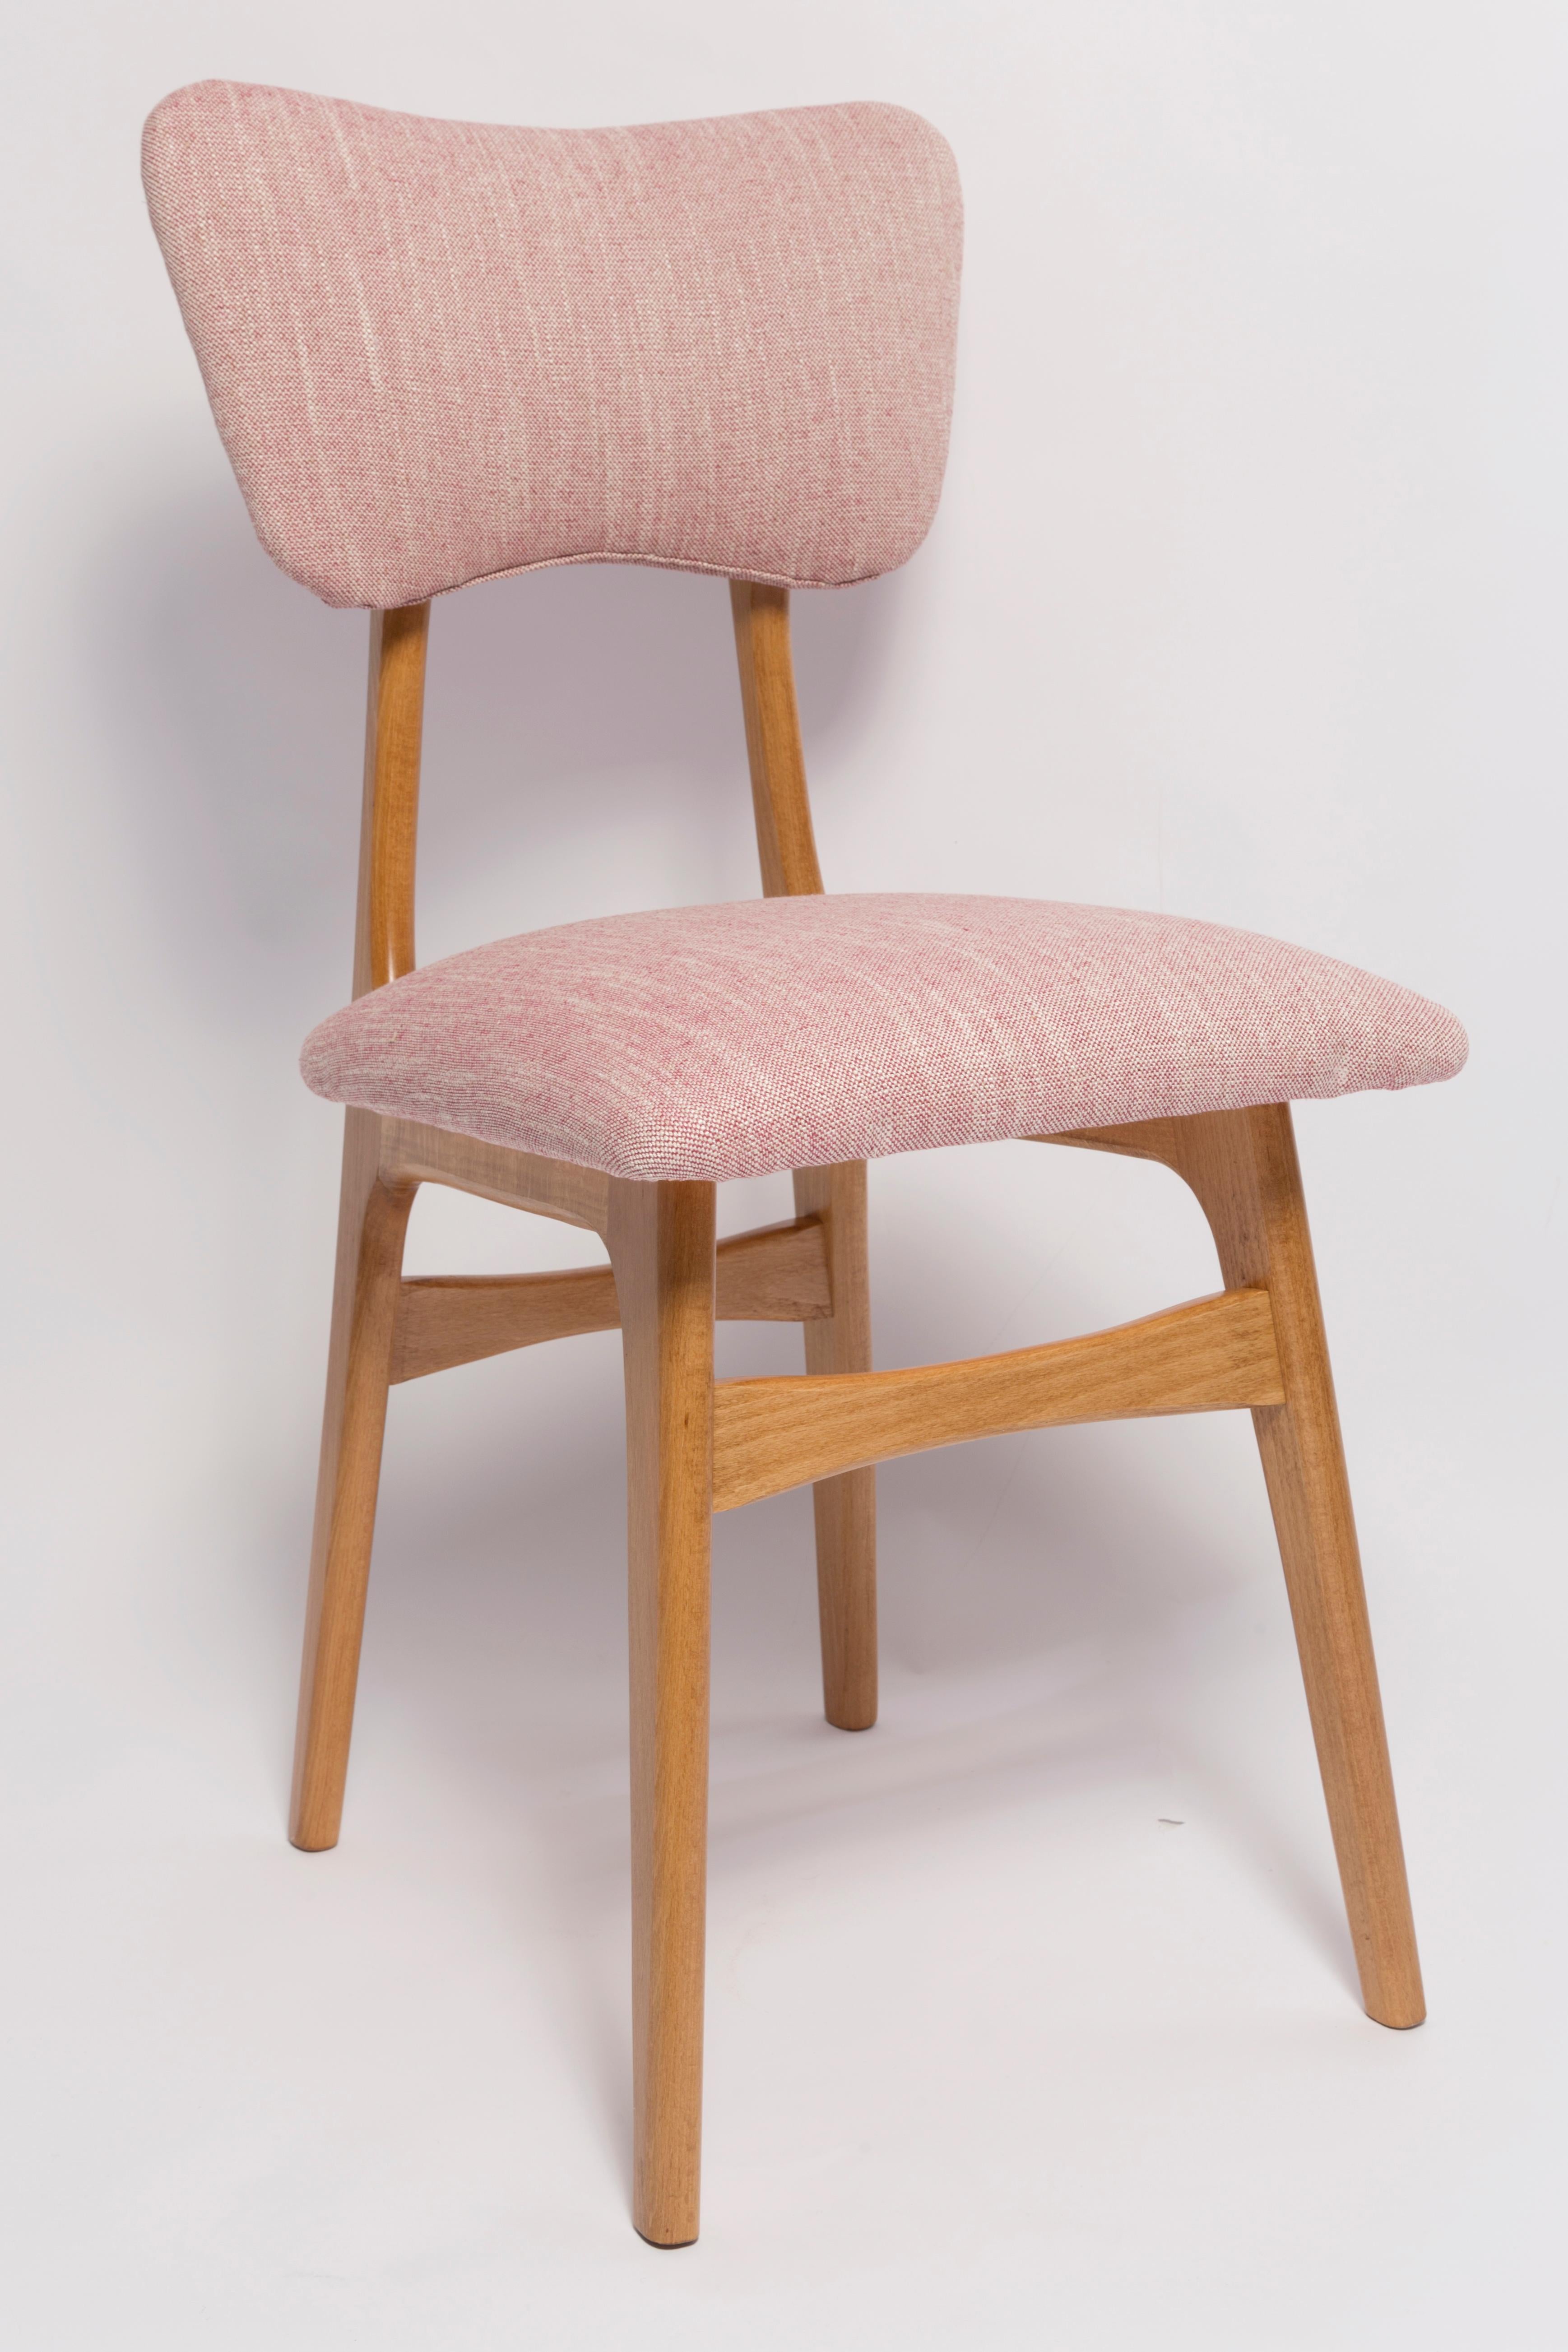 Mid-Century Modern Six Mid-Century Butterfly Dining Chairs, Pink Linen, Light Wood, Europe, 1960s For Sale